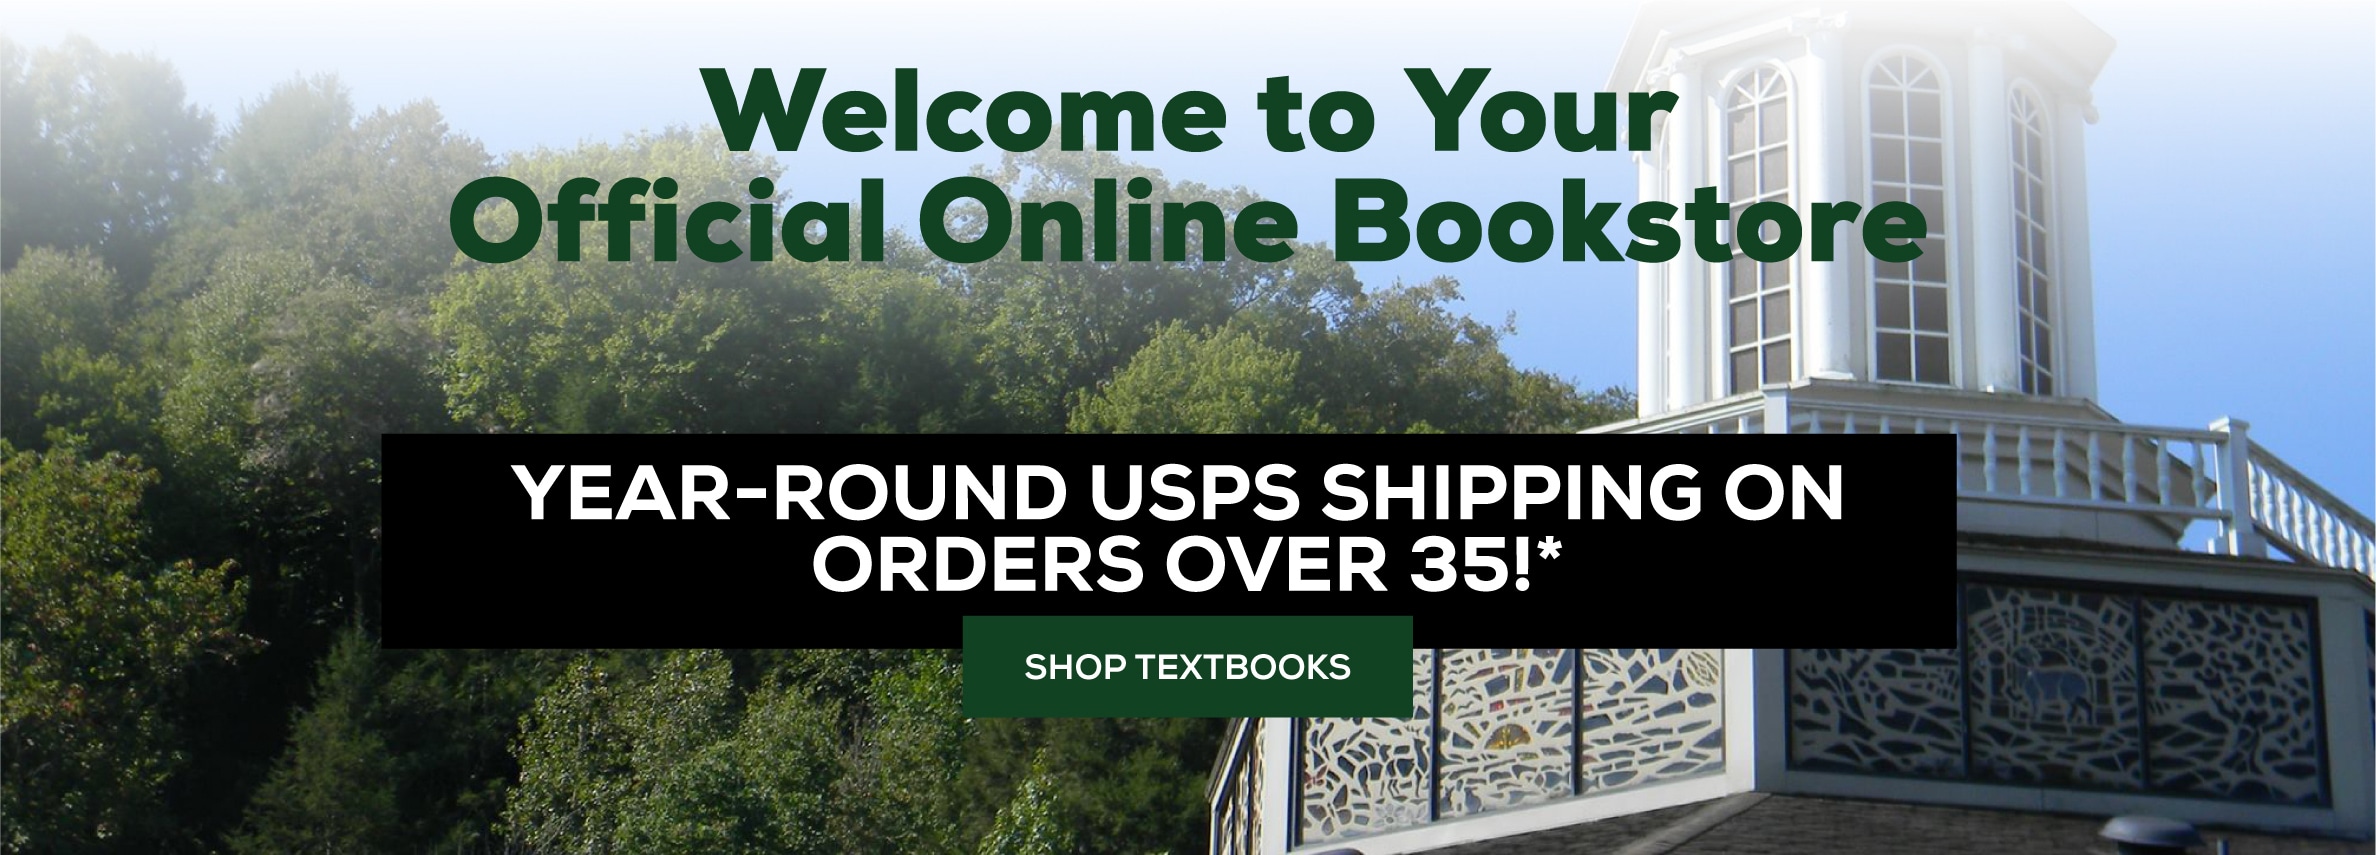 Welcome to Your Official Online Bookstore - Year Round USPS Shipping on Orders Over 35!*